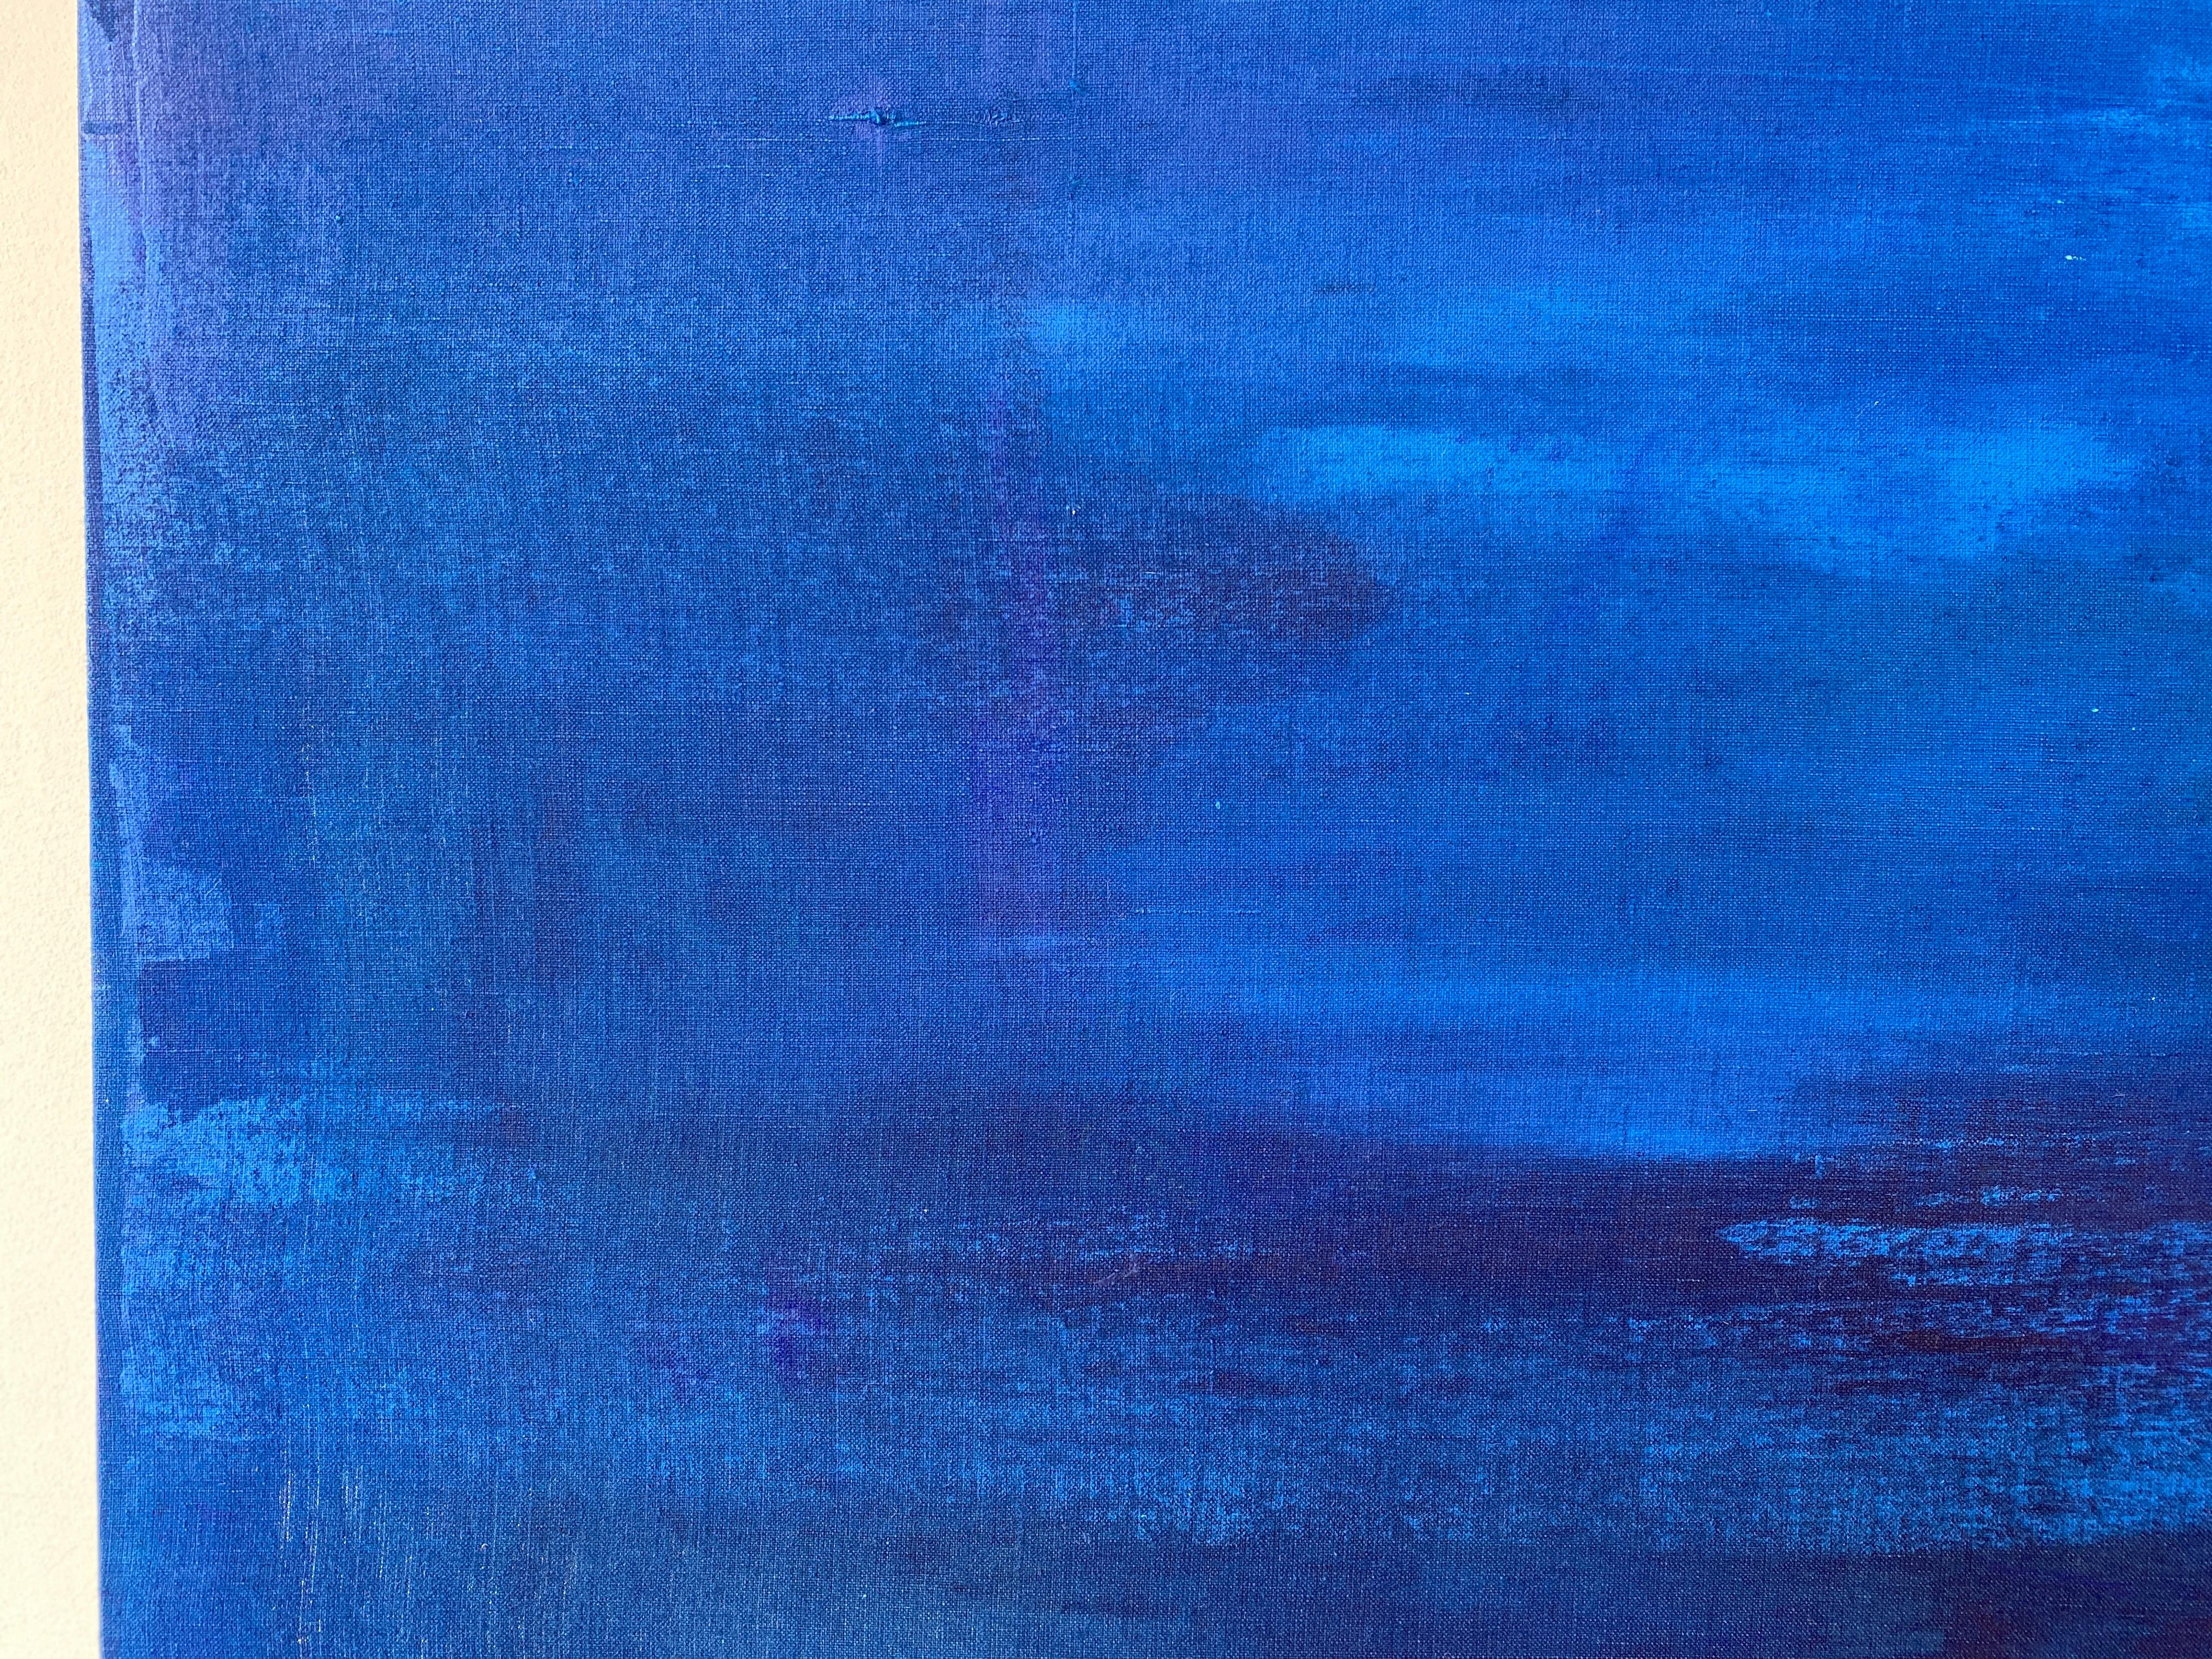 Big Blue cobalt large scale minimalist abstract painting statement artwork For Sale 9